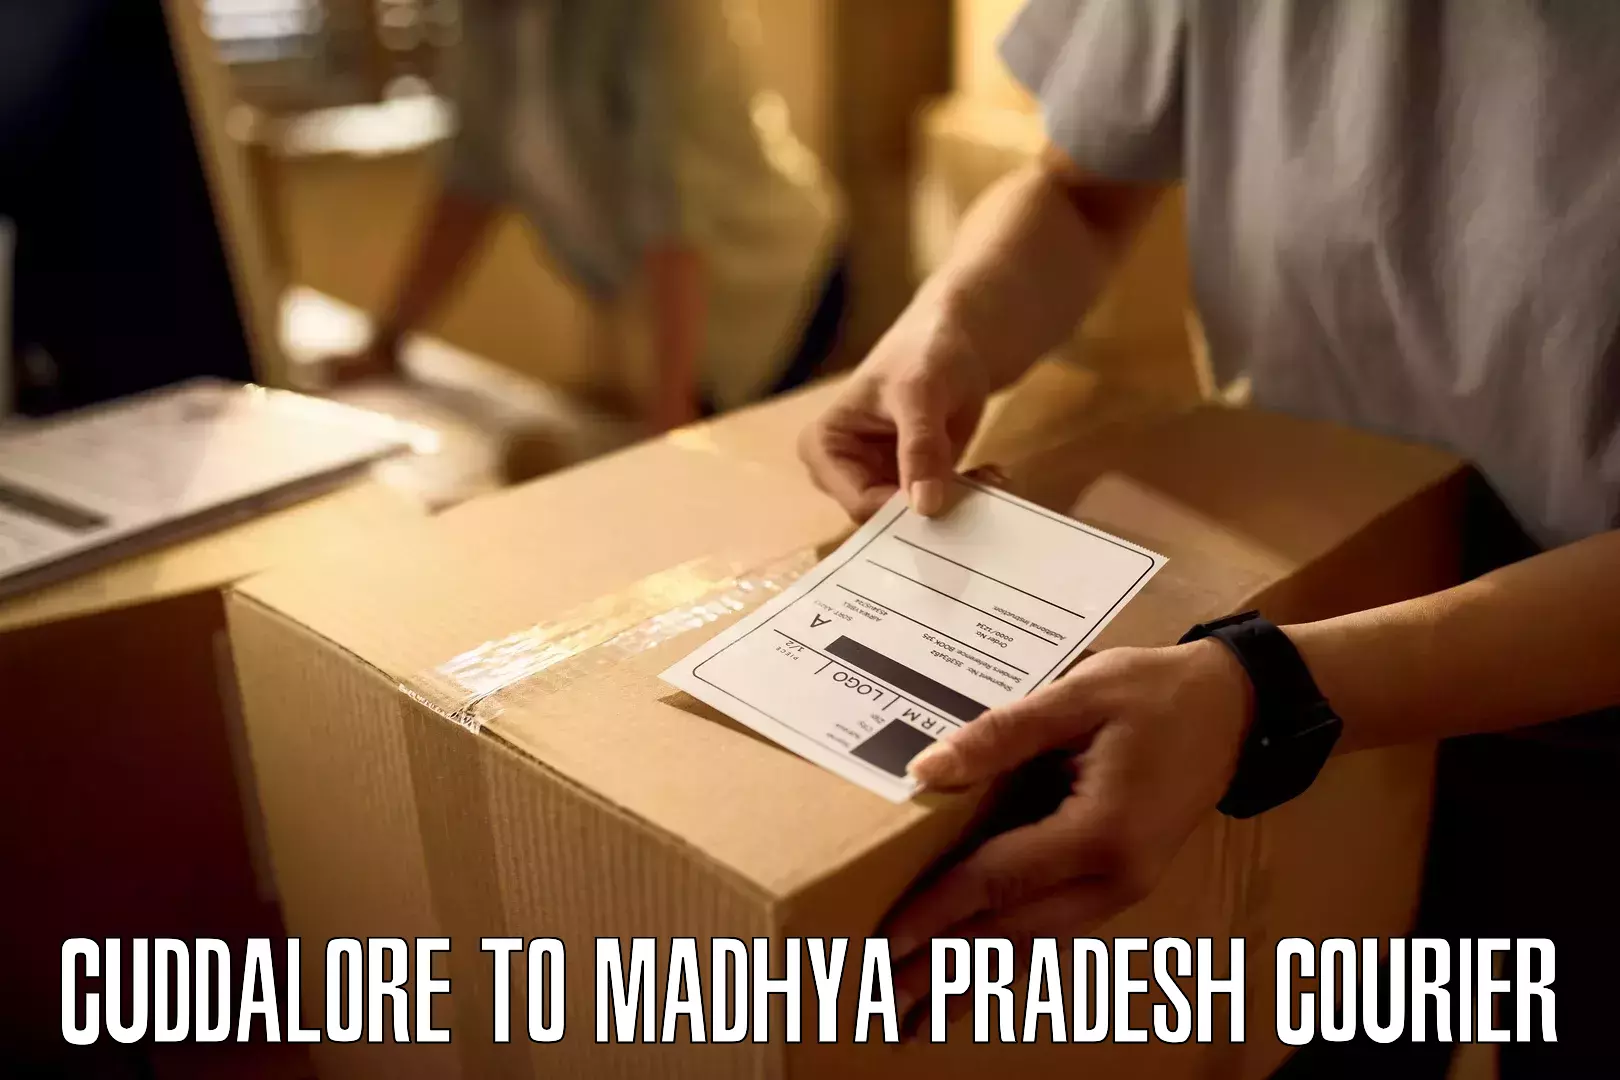 Reliable courier service Cuddalore to Nagod